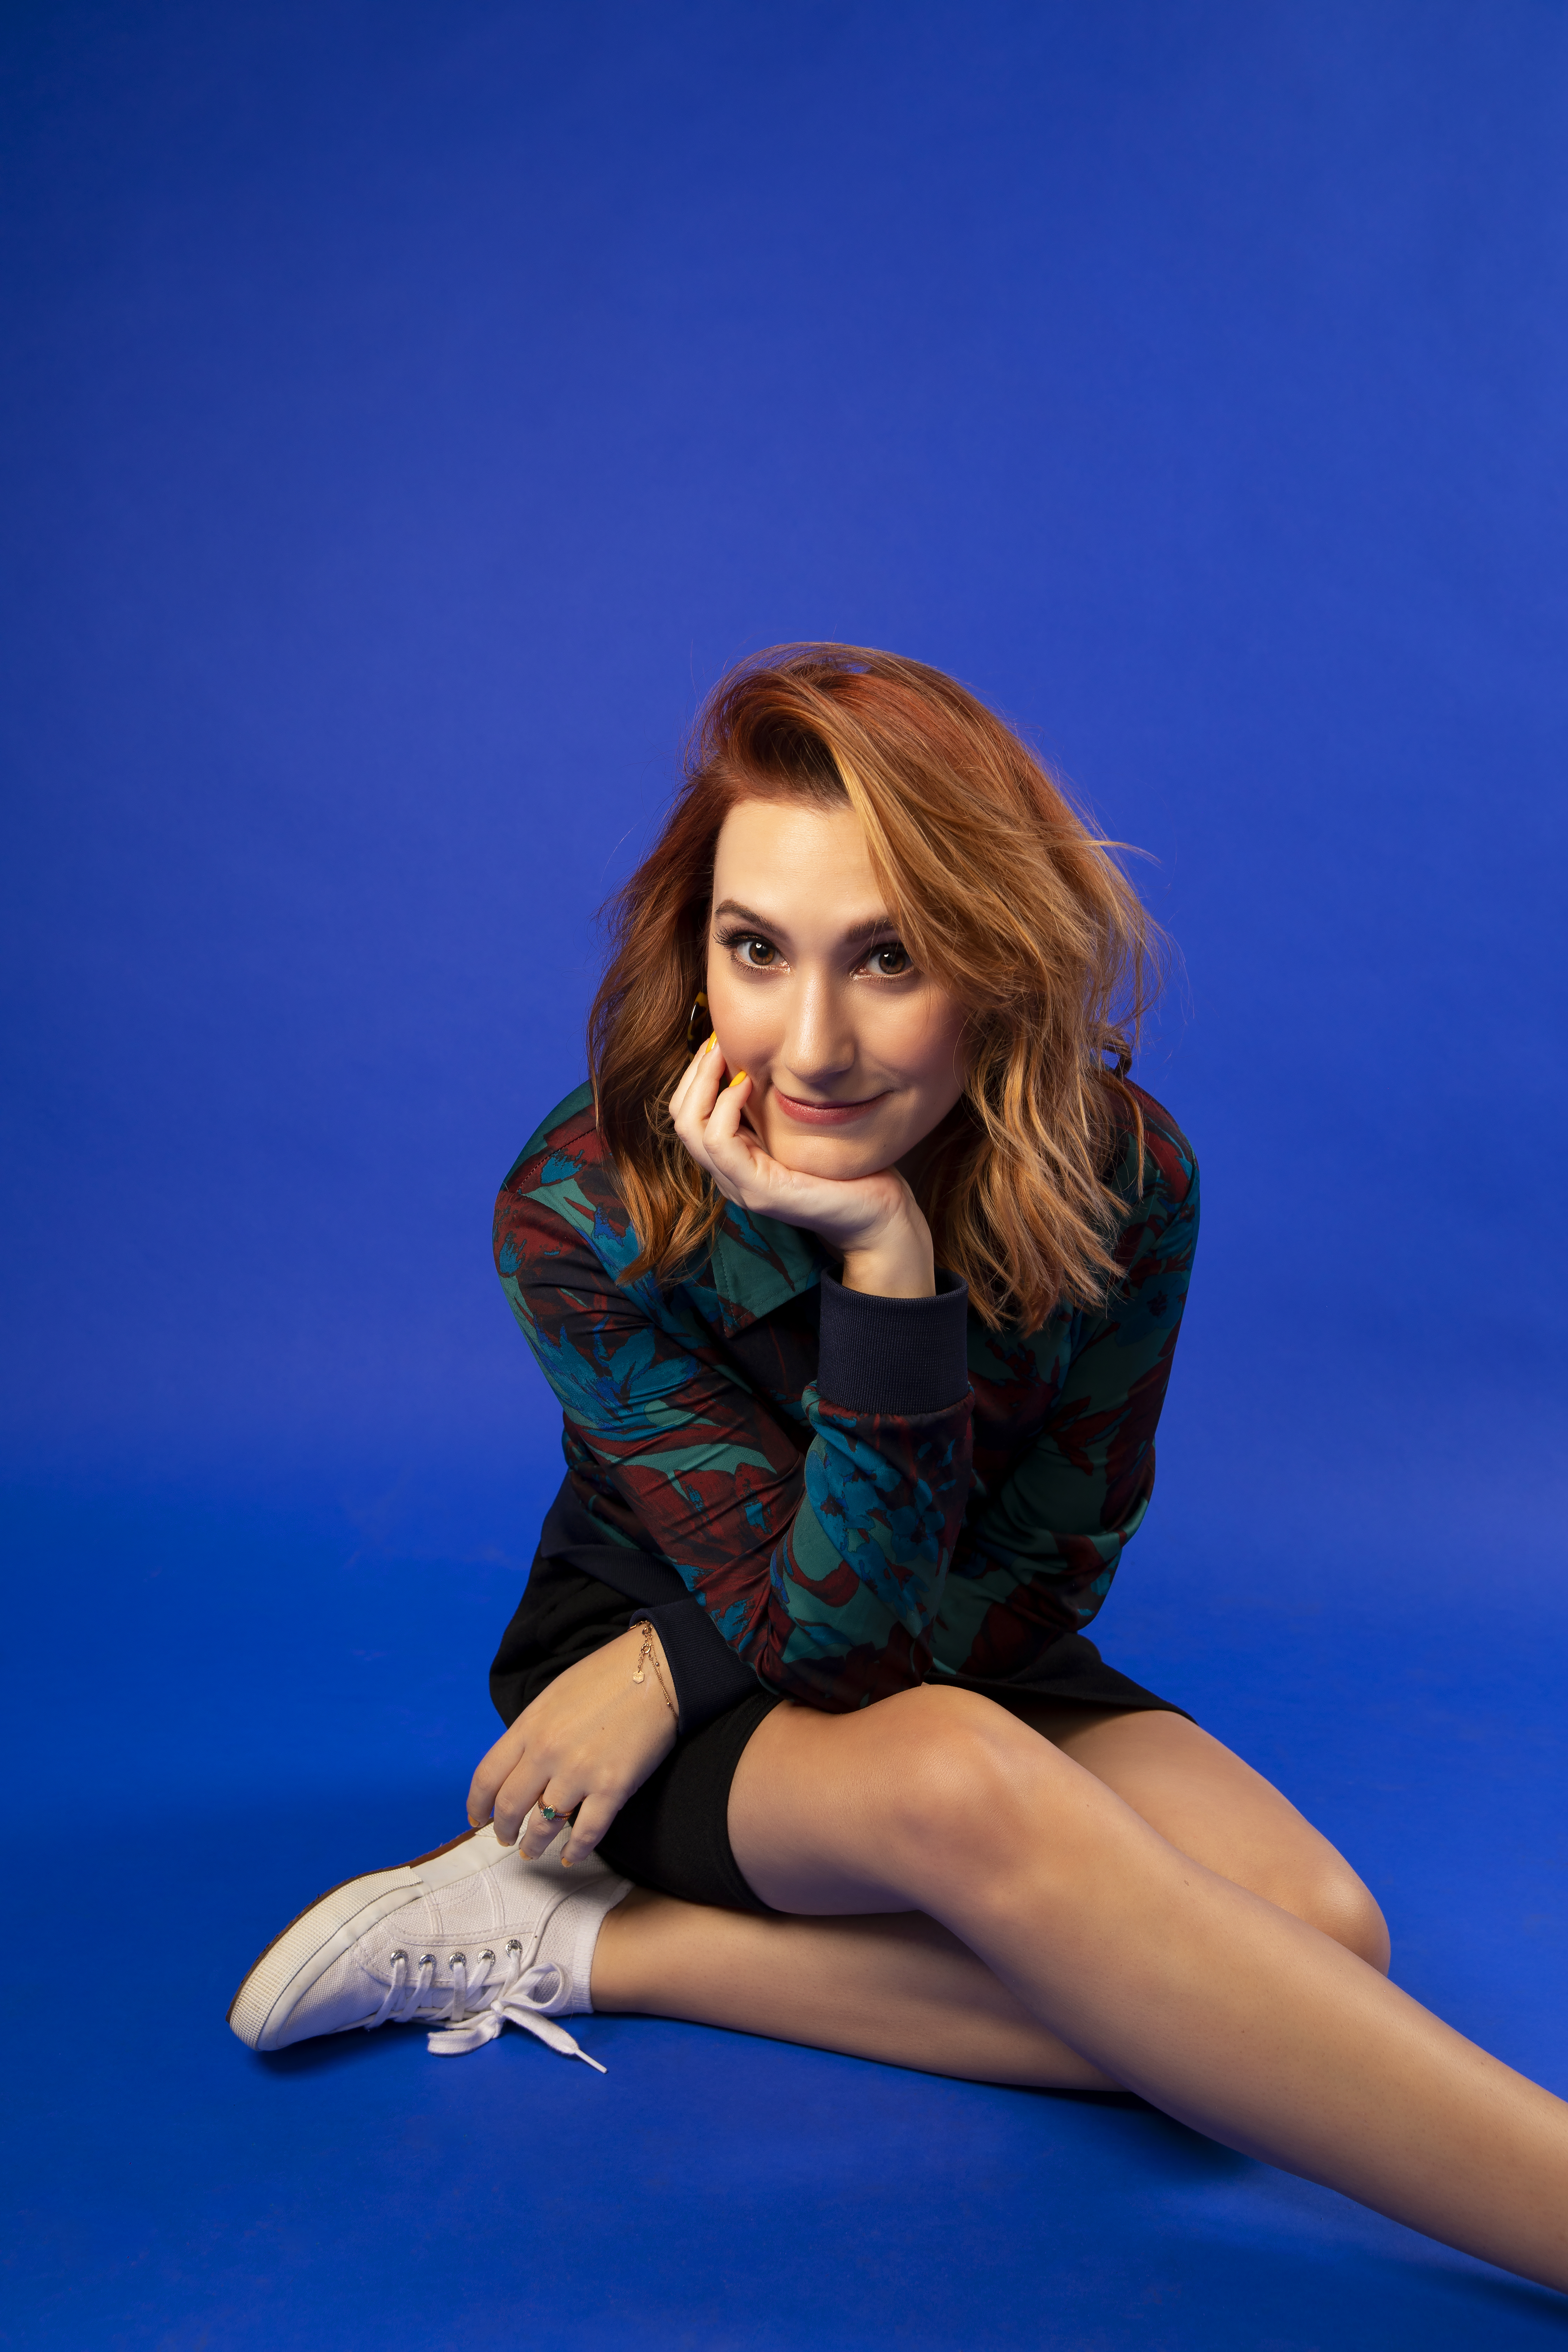 Sam Maggs sits in front of a royal blue background. She wears white tennis shoes and a patterned jackets. She has medium length red hair and she is sitting crosslegged with her head in her palm.